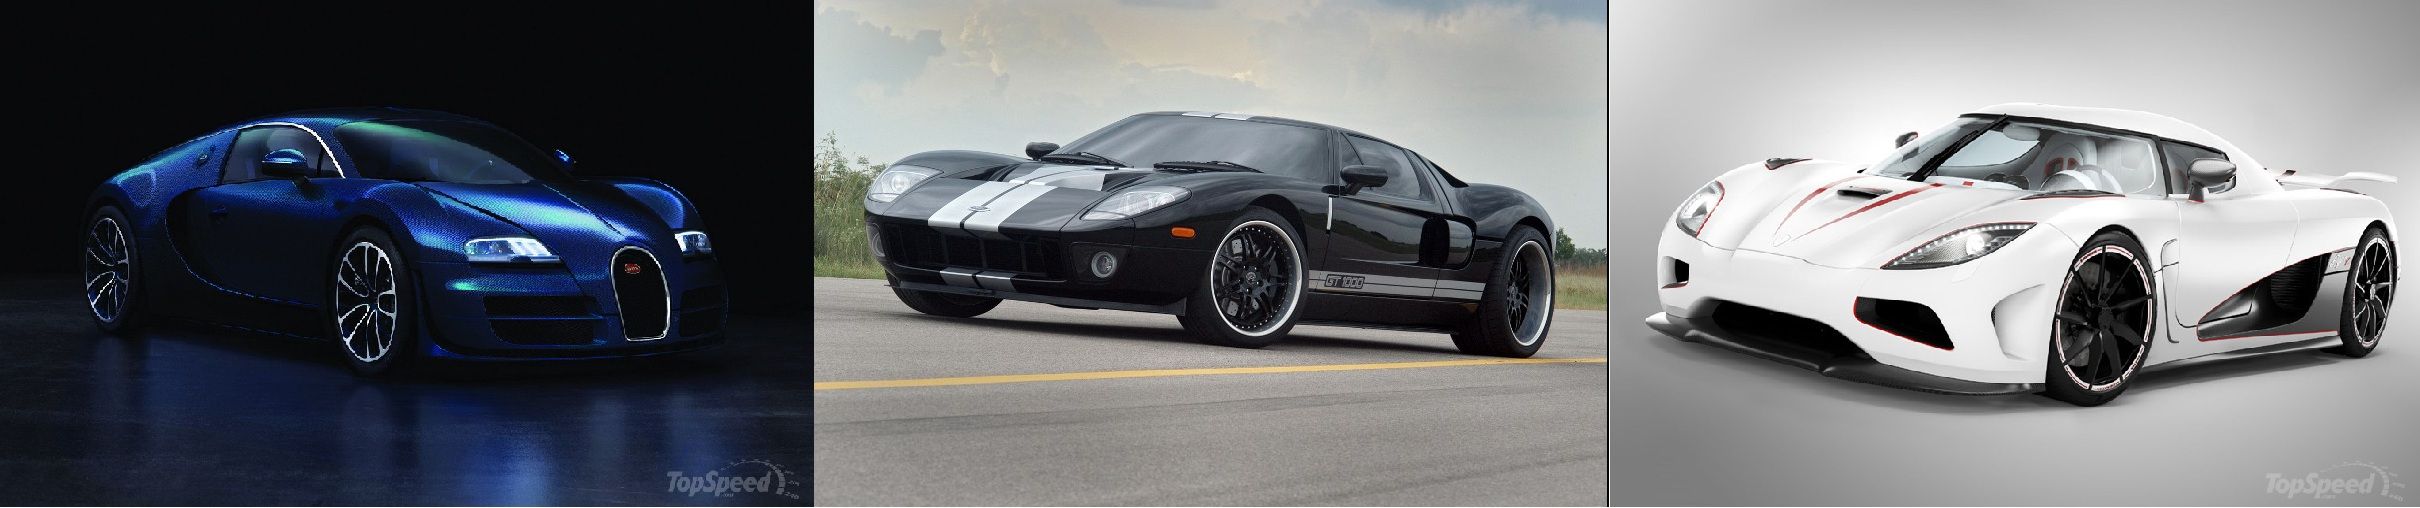 2006 Ford GT1000 Twin-Turbo by Hennessey